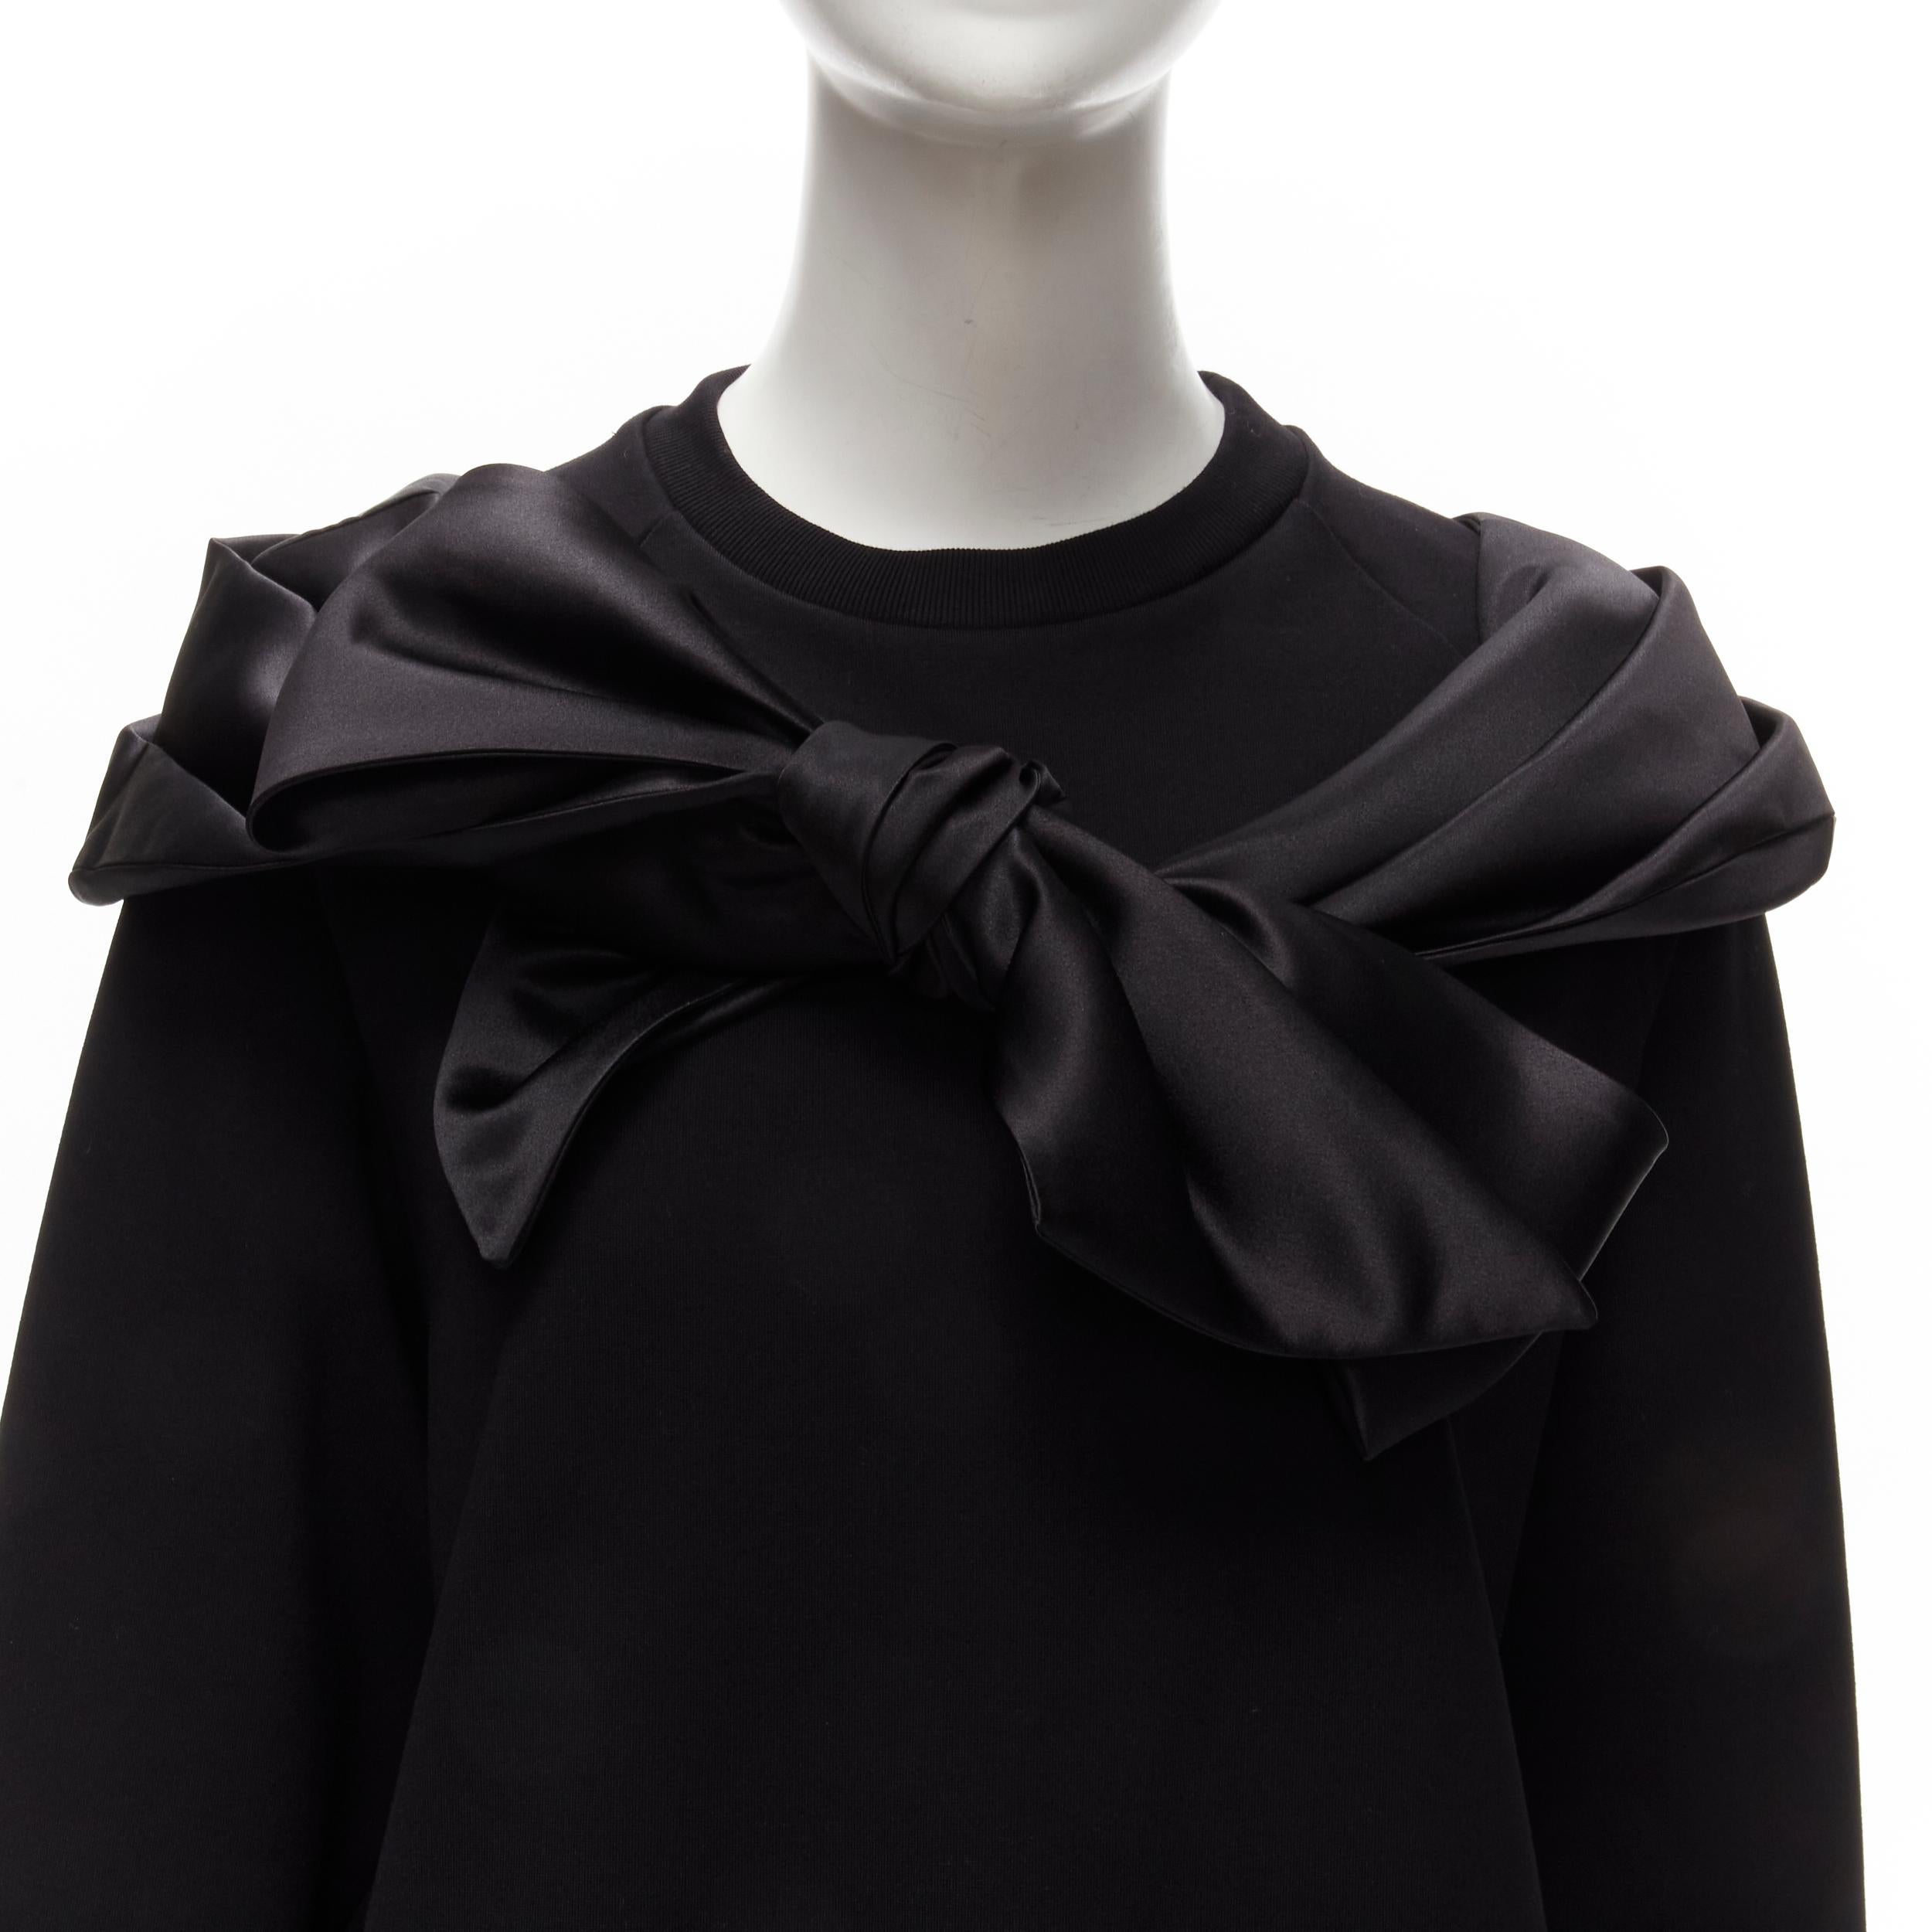 SIMONE ROCHA black bow tie sash oversized pullover sweatshirt XXS
Reference: AAWC/A00257
Brand: Simone Rocha
Material: Viscose
Color: Black
Pattern: Solid
Extra Details: Black viscose-blend oversized sweatshirt. Attached pleat bow sash.
Made in: